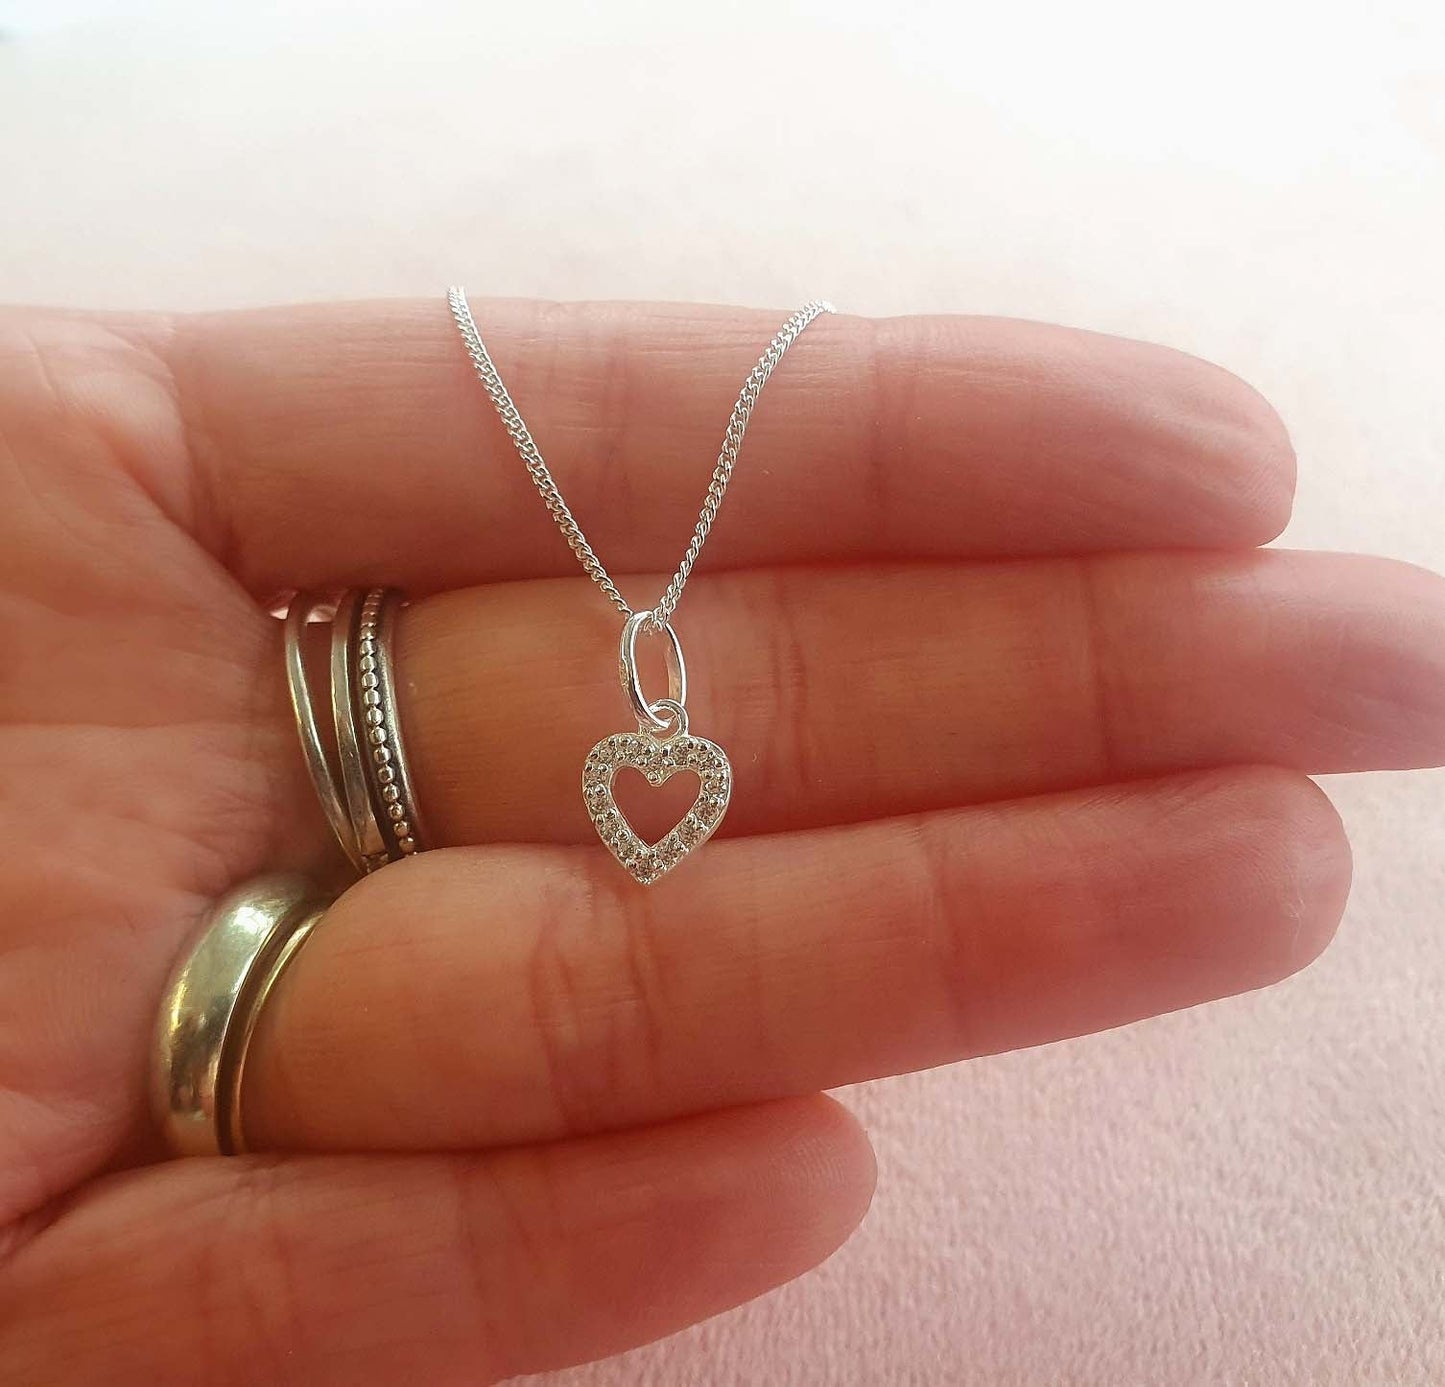 Grandma Heart Necklace with Cubic Zirconia in Sterling Silver 925, Personalised Gift